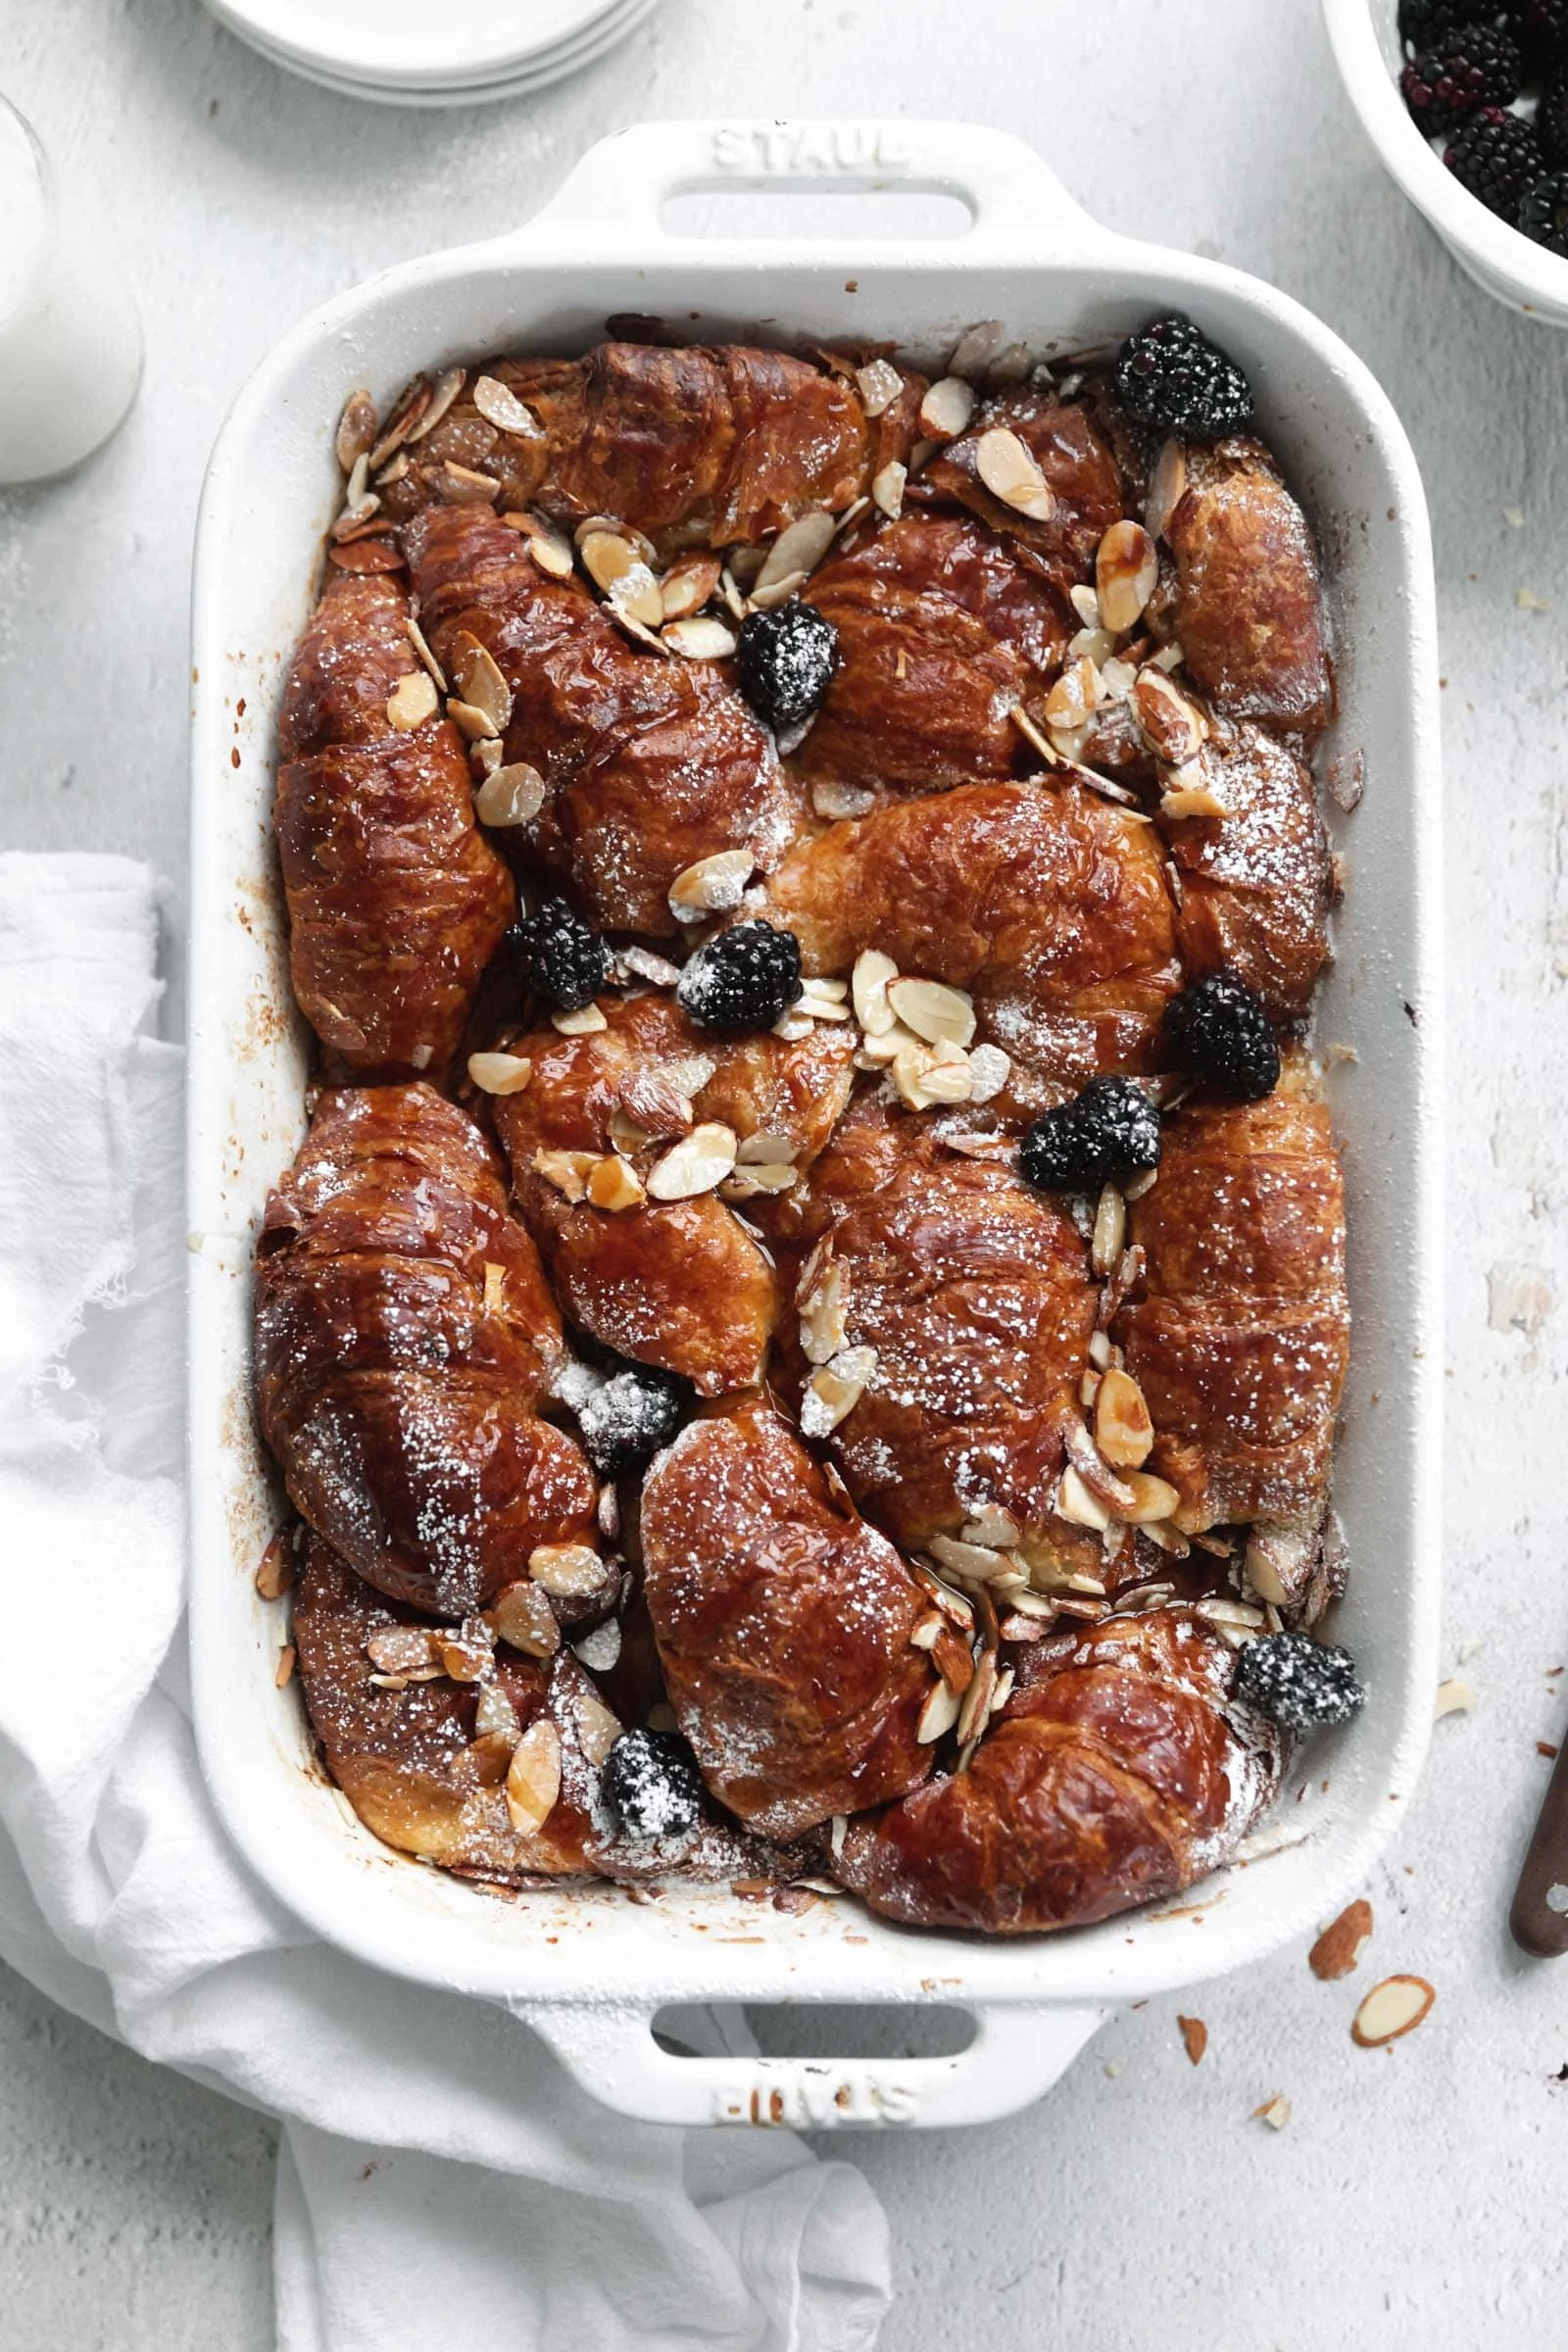 almond croissant french toast bake